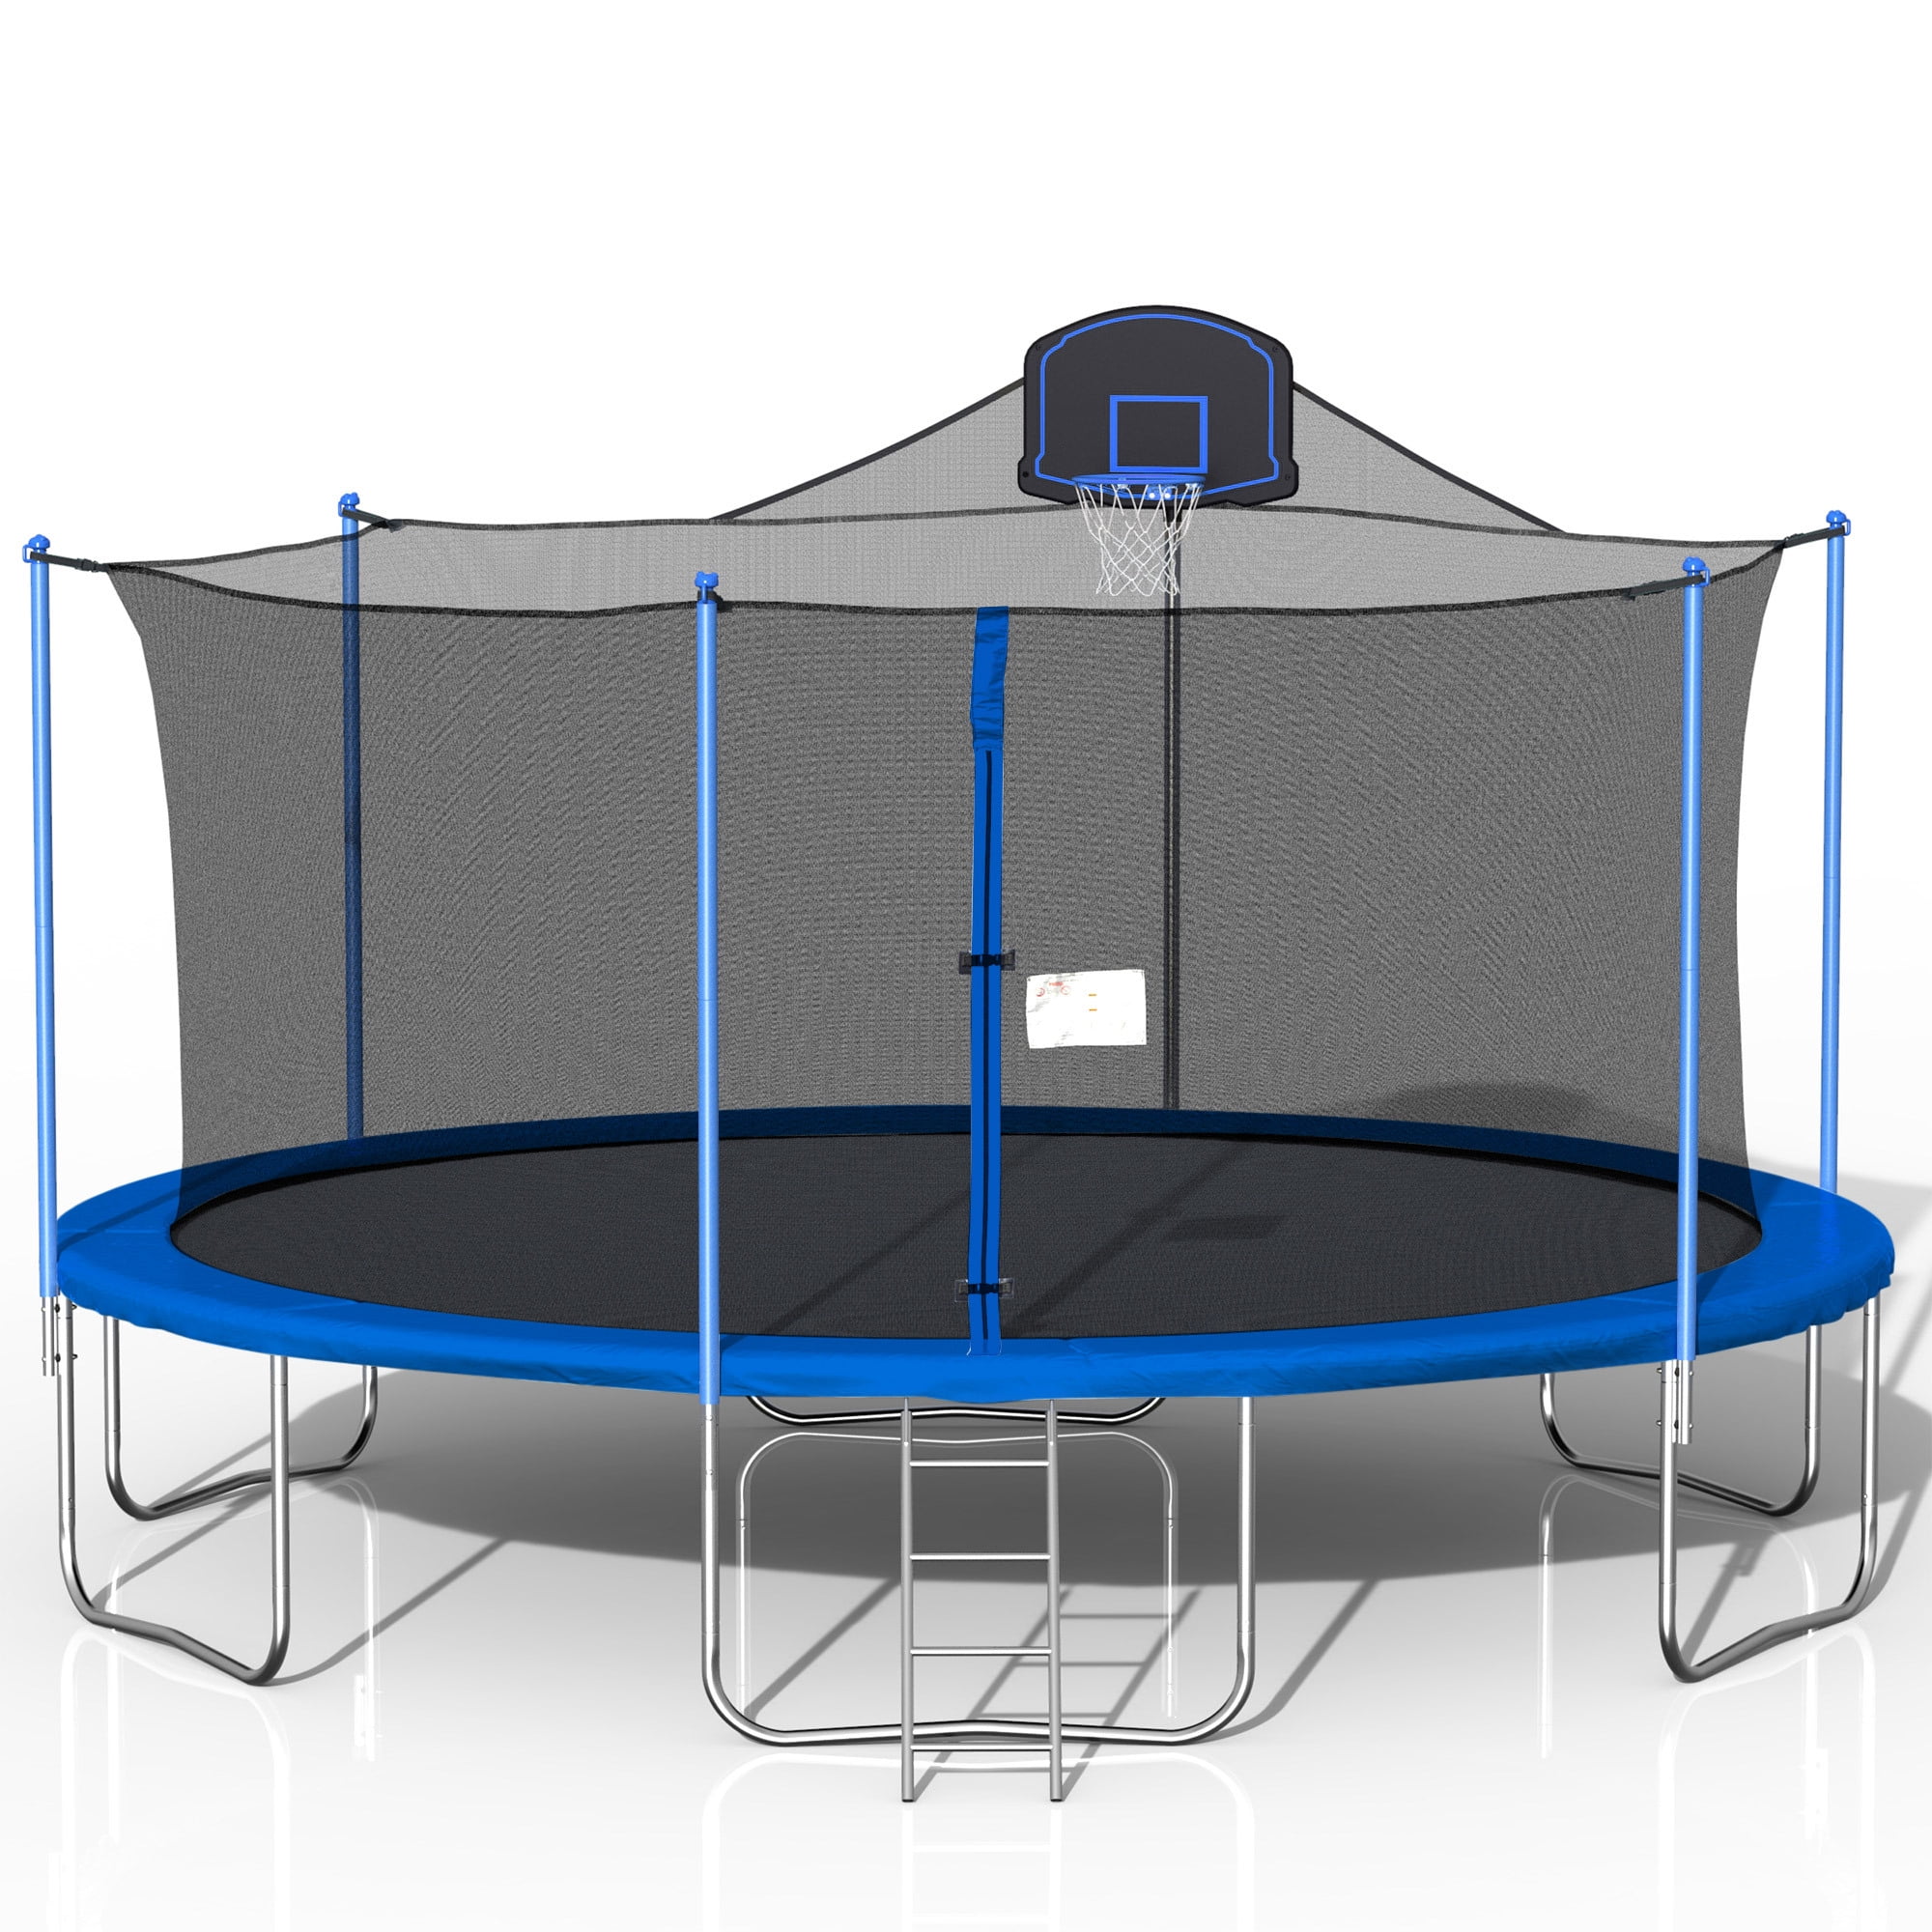 Aukfa 16FT with enclosure net,Outdoor Cardio Exercise,Trampoline for Adults with 360-degree safety net and Ladder,330 lbs Weight Capacity,Easy -